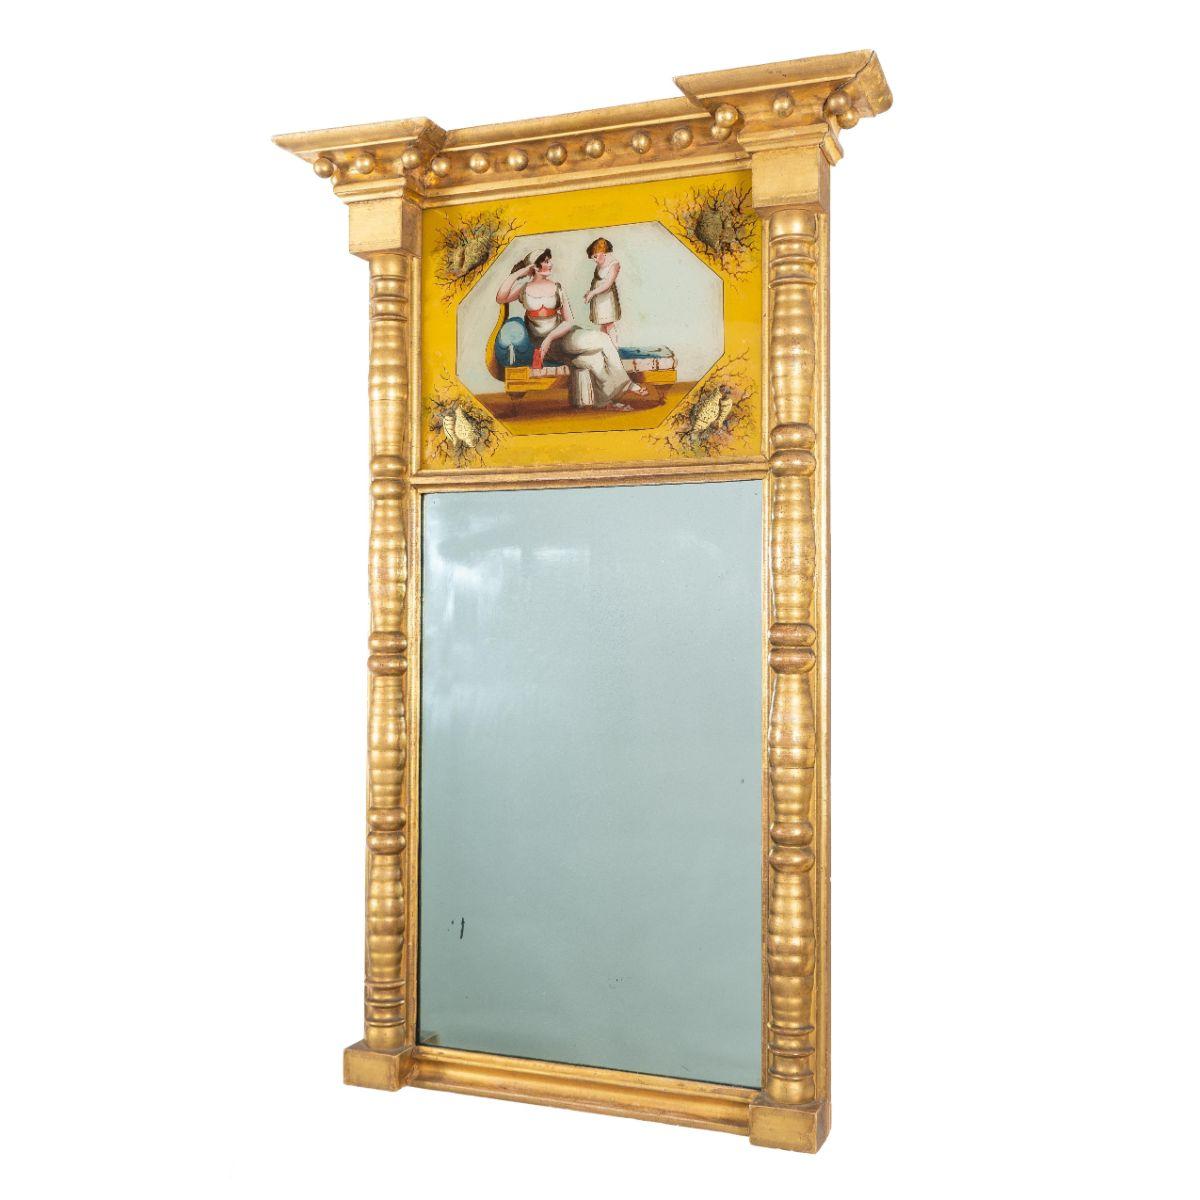 American Sheraton gilt gesso tabernacle looking glass with eglomisé upper glass panel above a mercury amalgam mirror. The turned columns support an entablature and cornice which is fitted with ball pendants.